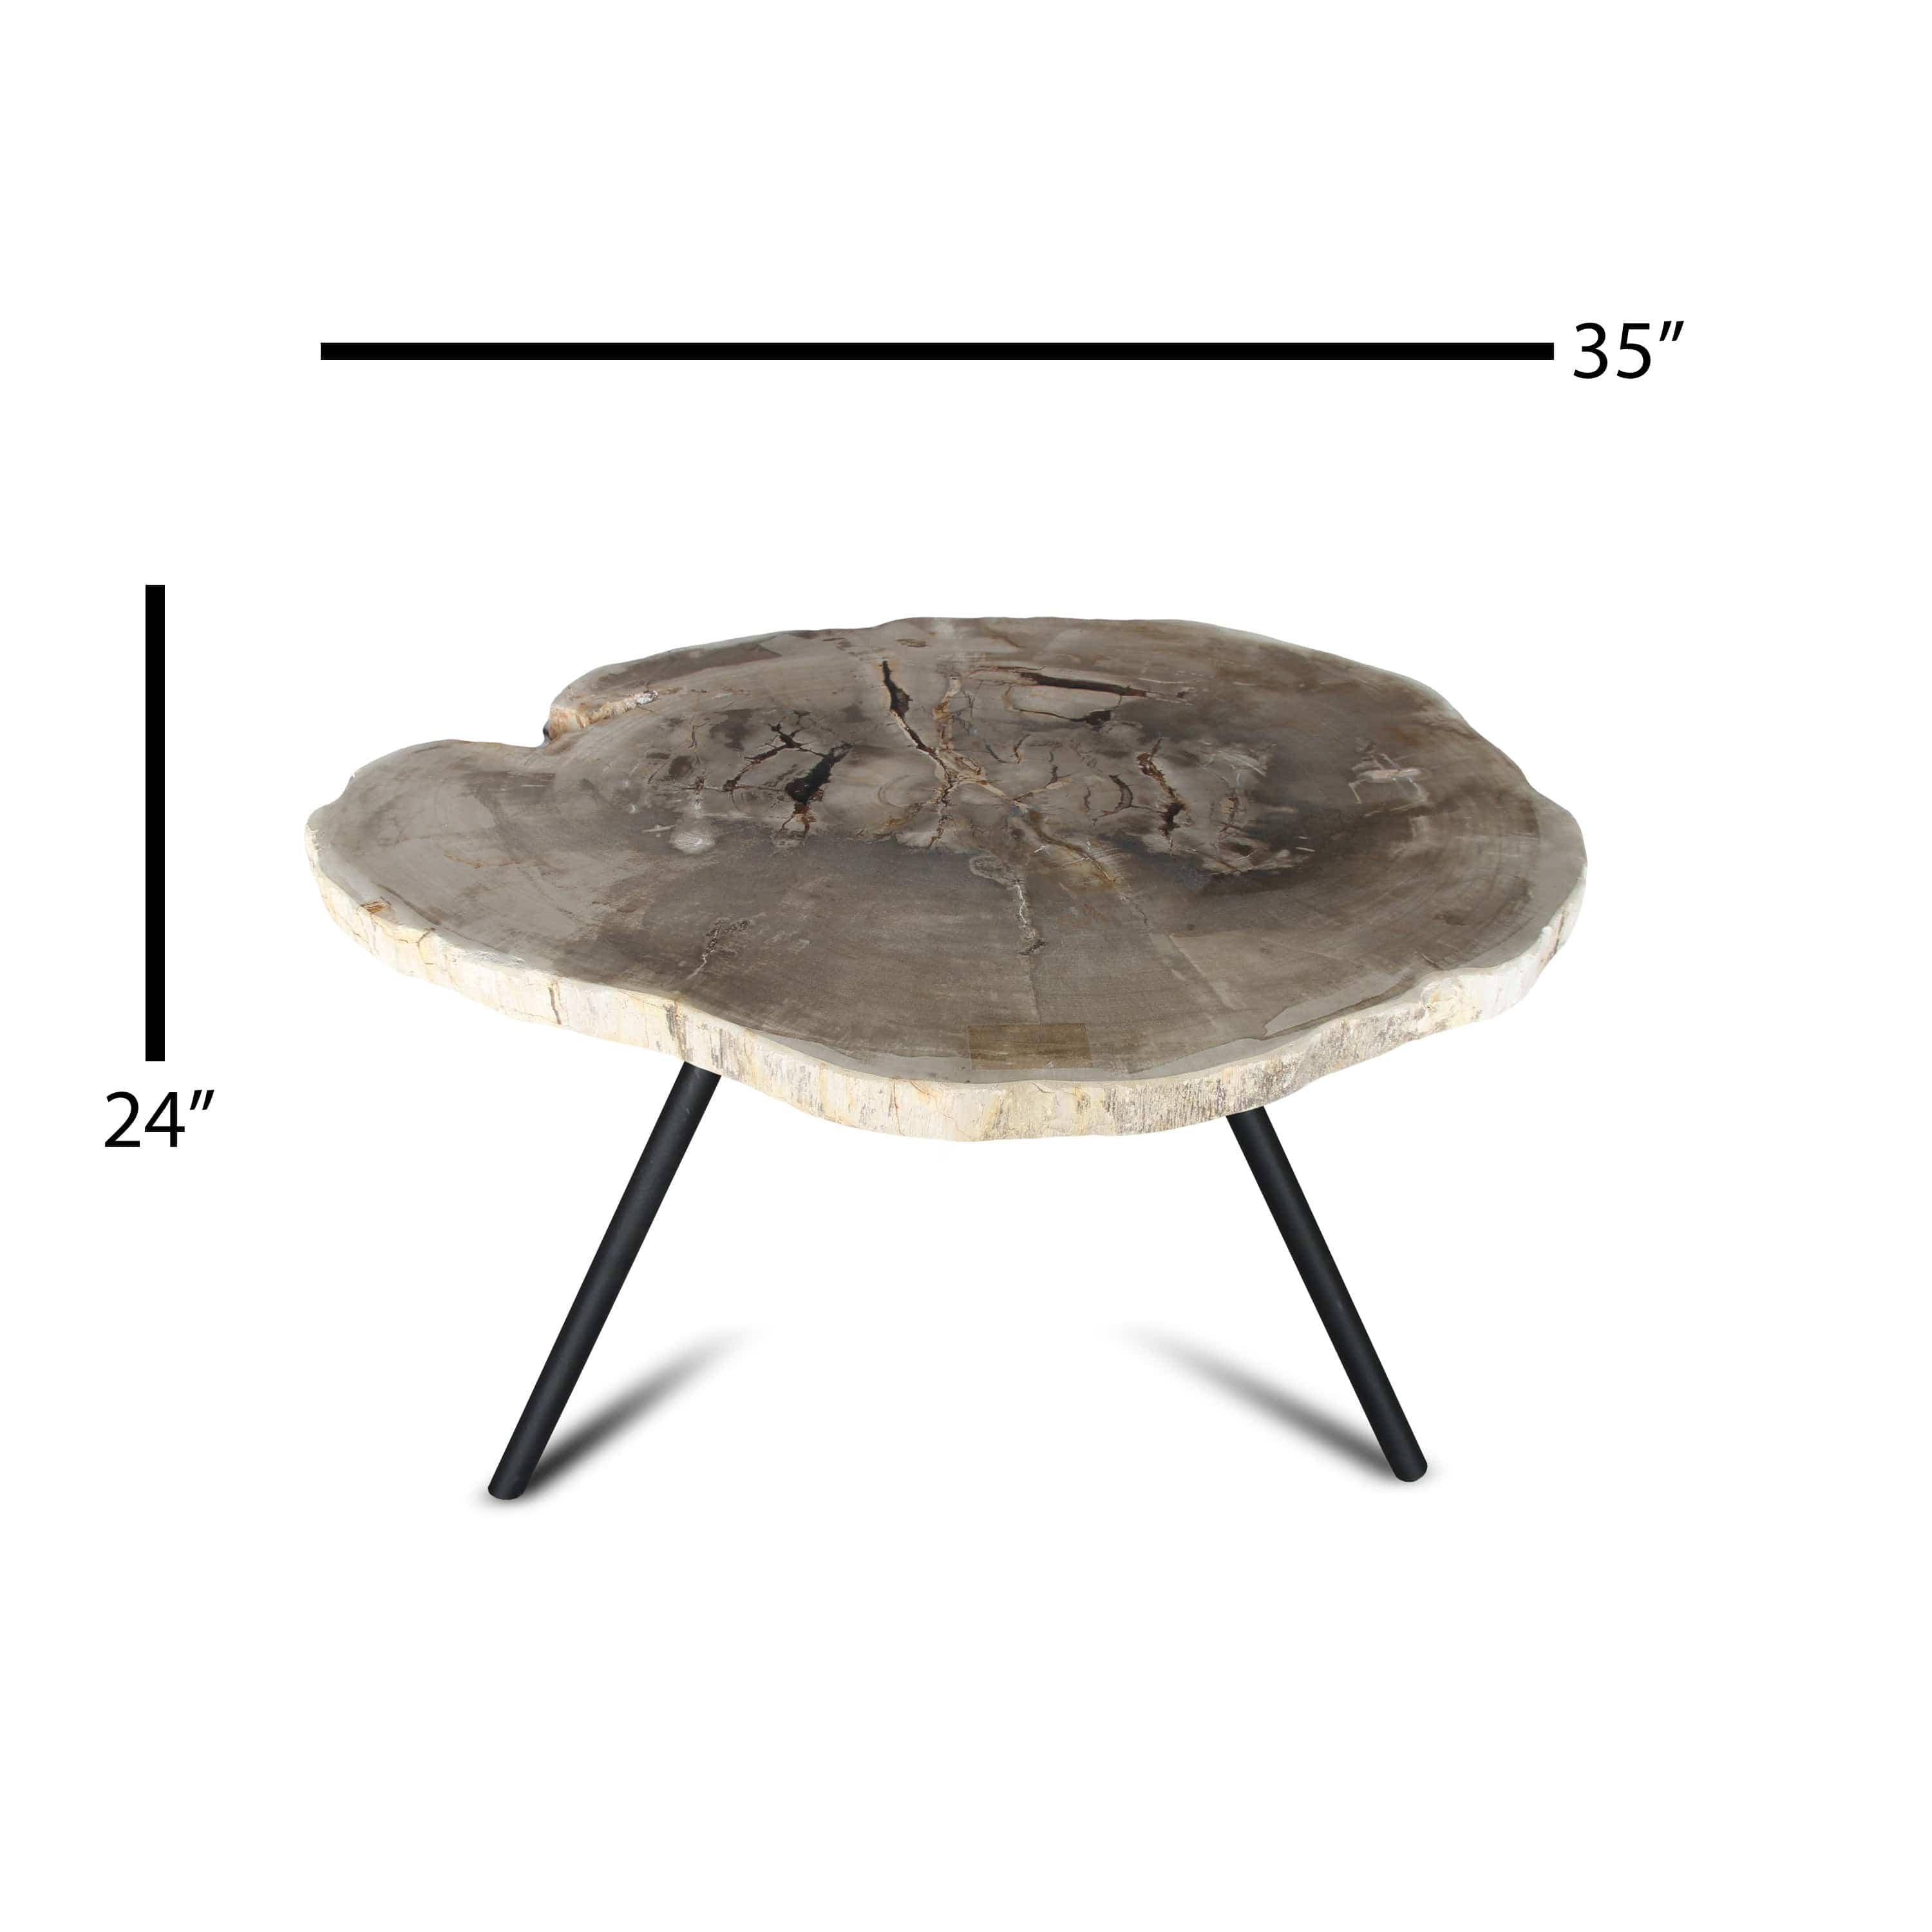 Kalifano Petrified Wood Petrified Wood Round Slice Side Table from Indonesia - 35" / 86 lbs PWT3200.002